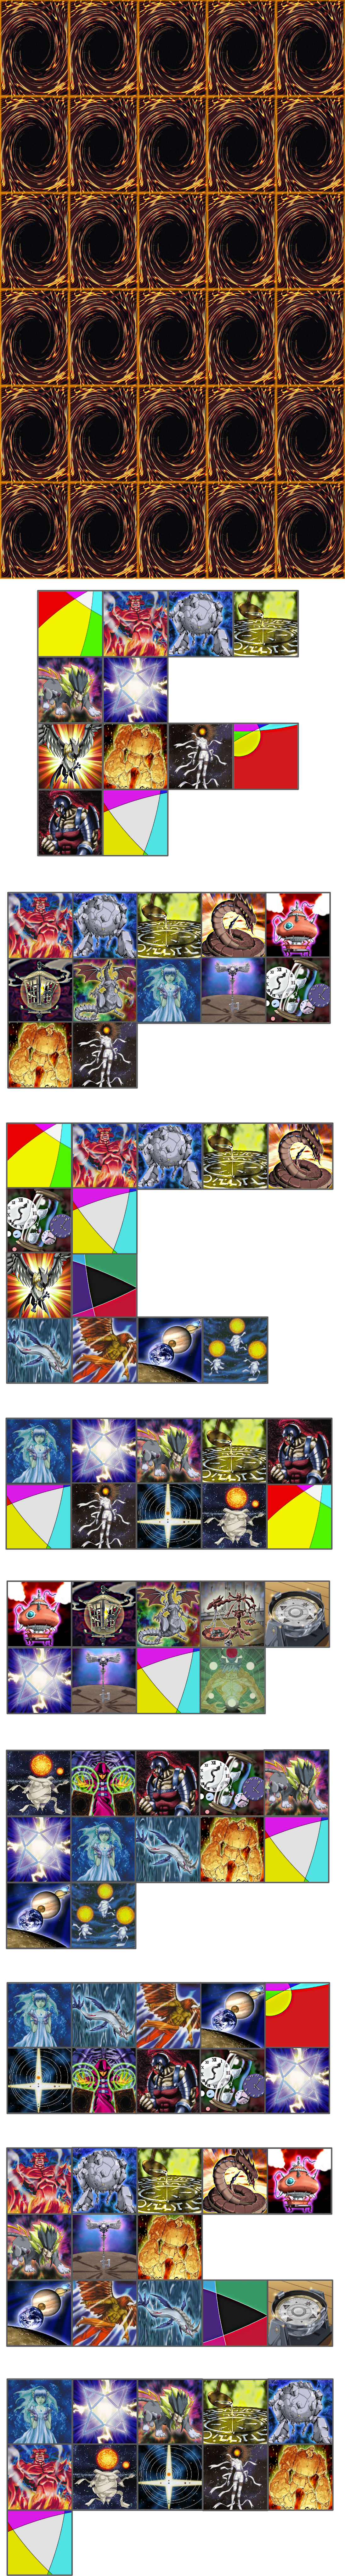 A grid of unknown Yugioh Cards and other mysterious clues